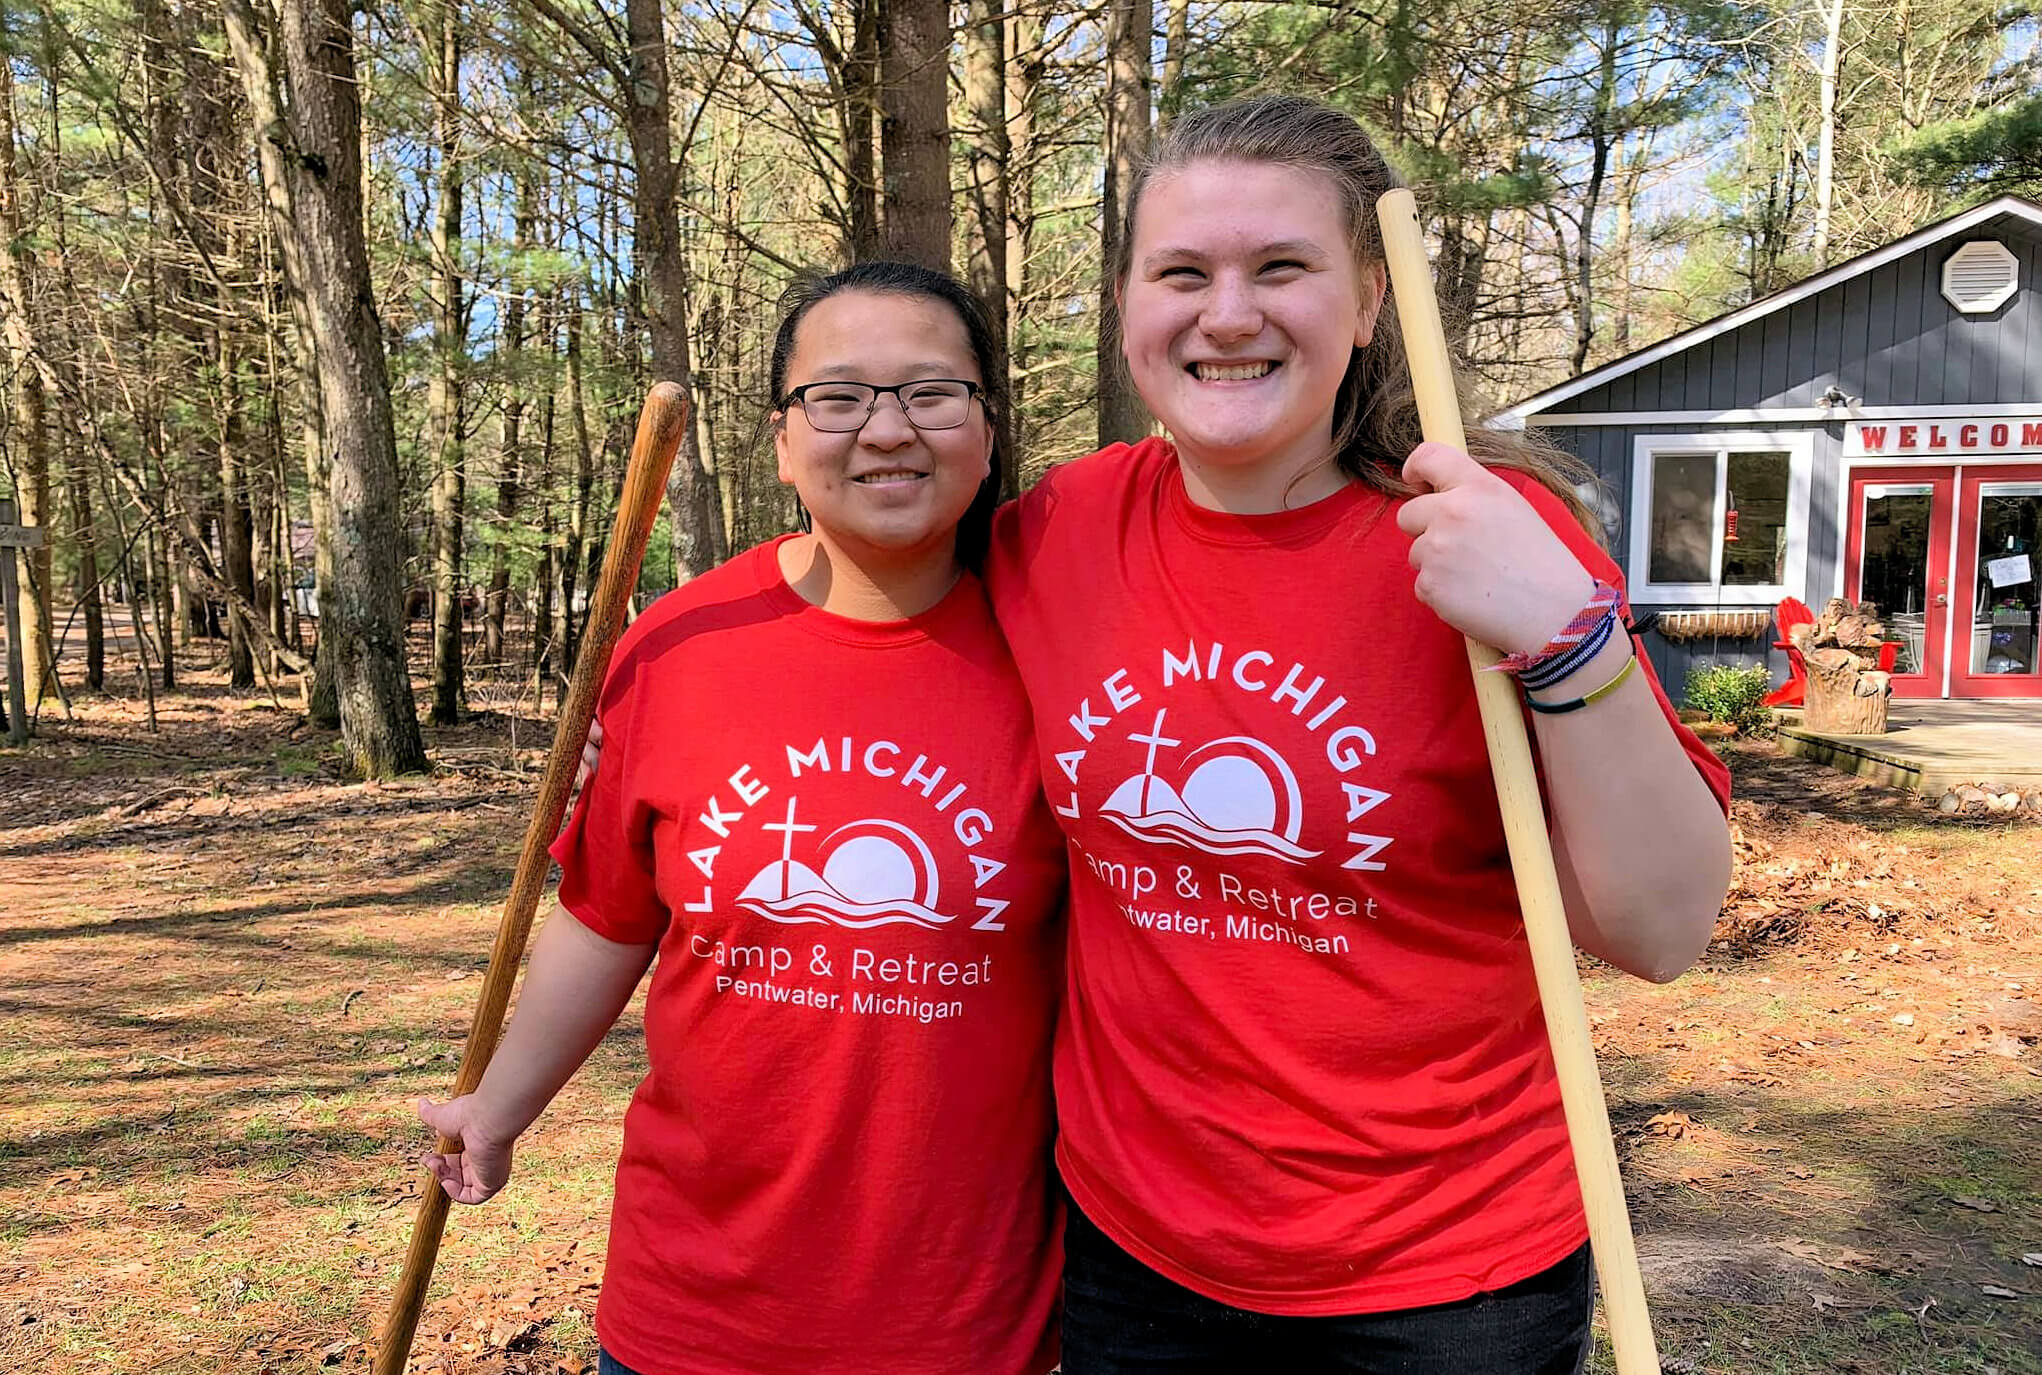 Girls cleaning up Lake Michigan site for camping in 2019